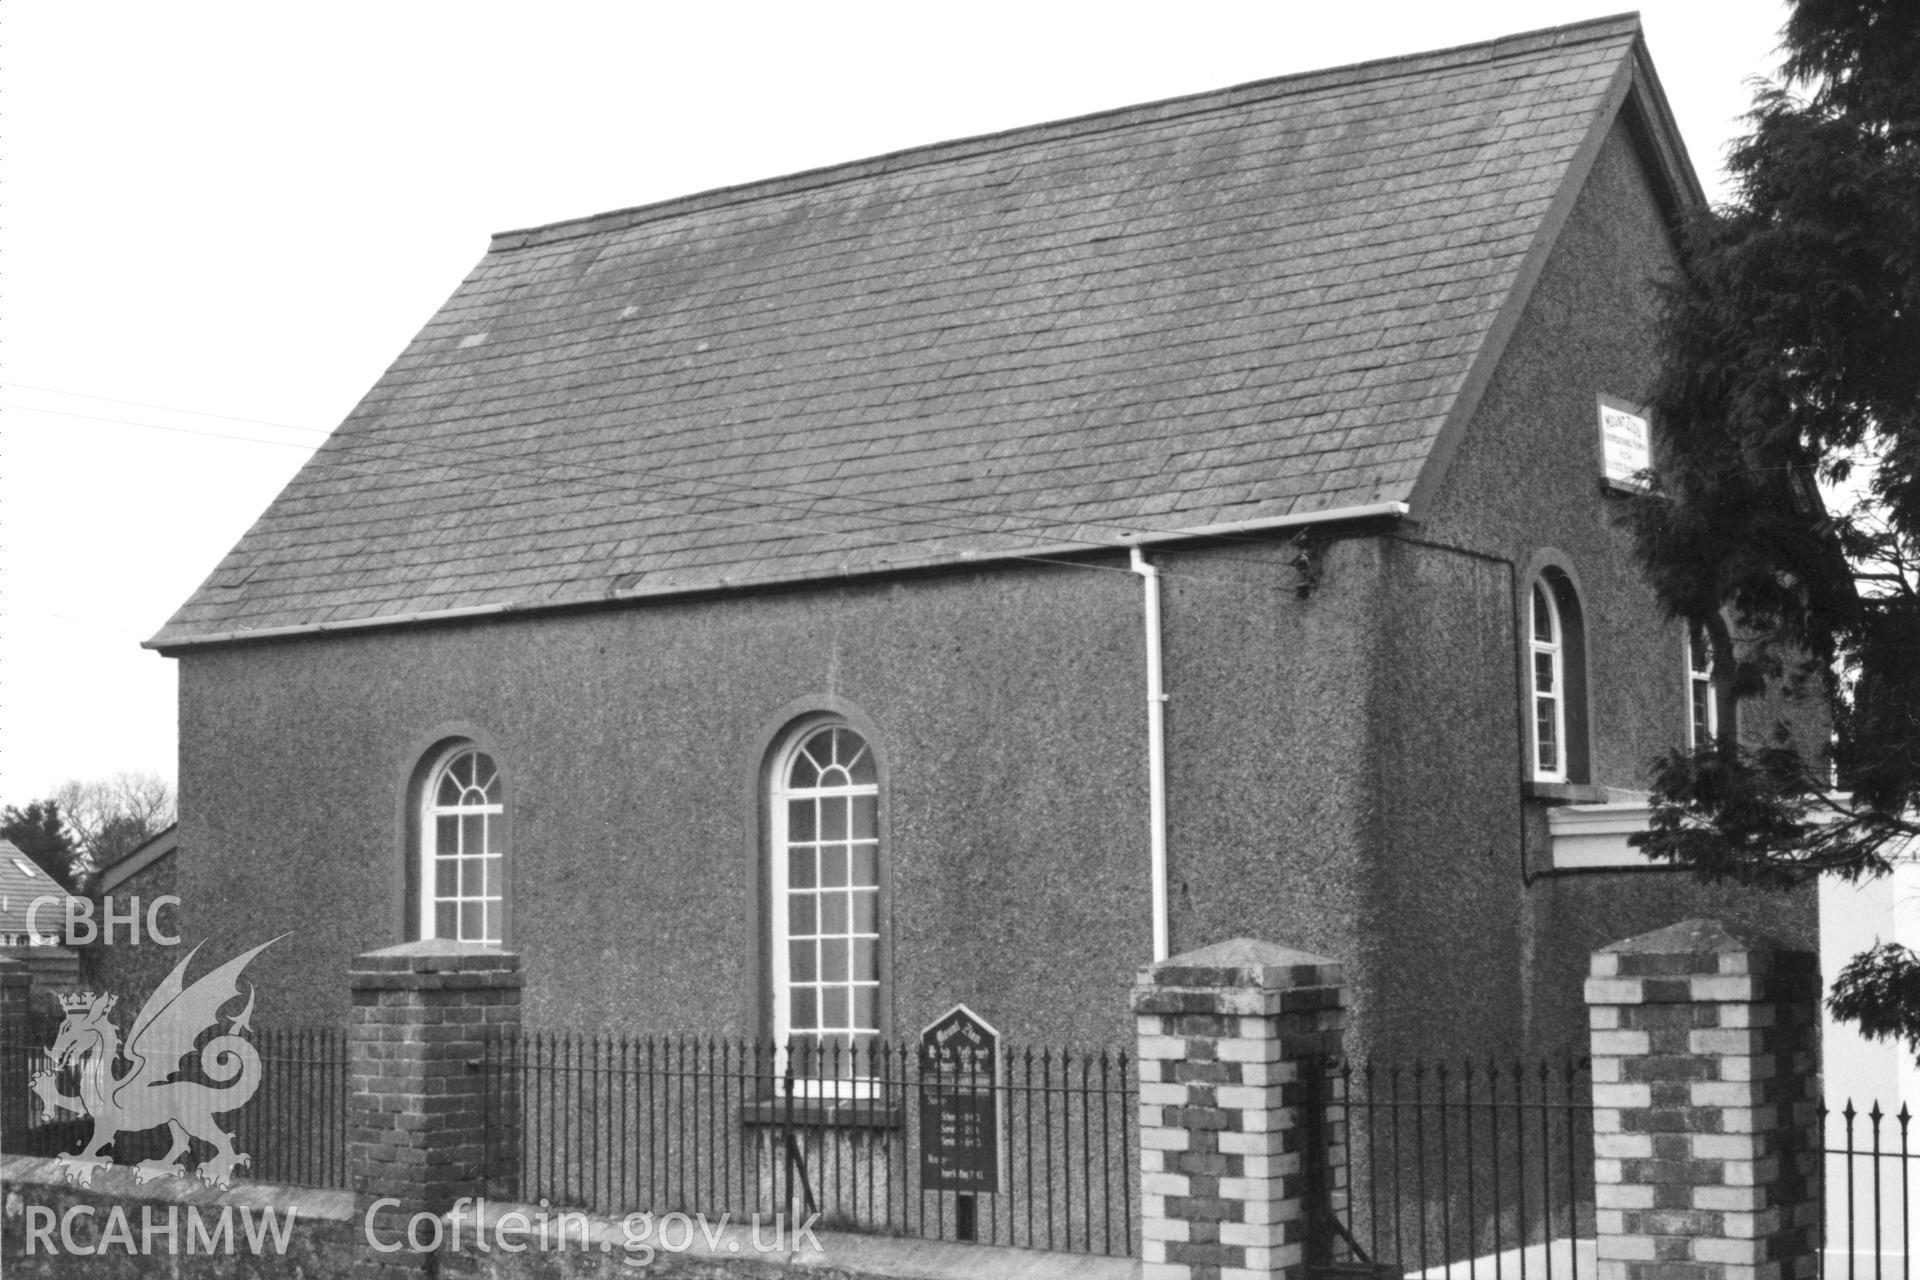 Digital copy of a black and white photograph showing an exterior view of Mount Zion Congregational Chapel, West Hook, taken by Robert Scourfield, 1996.